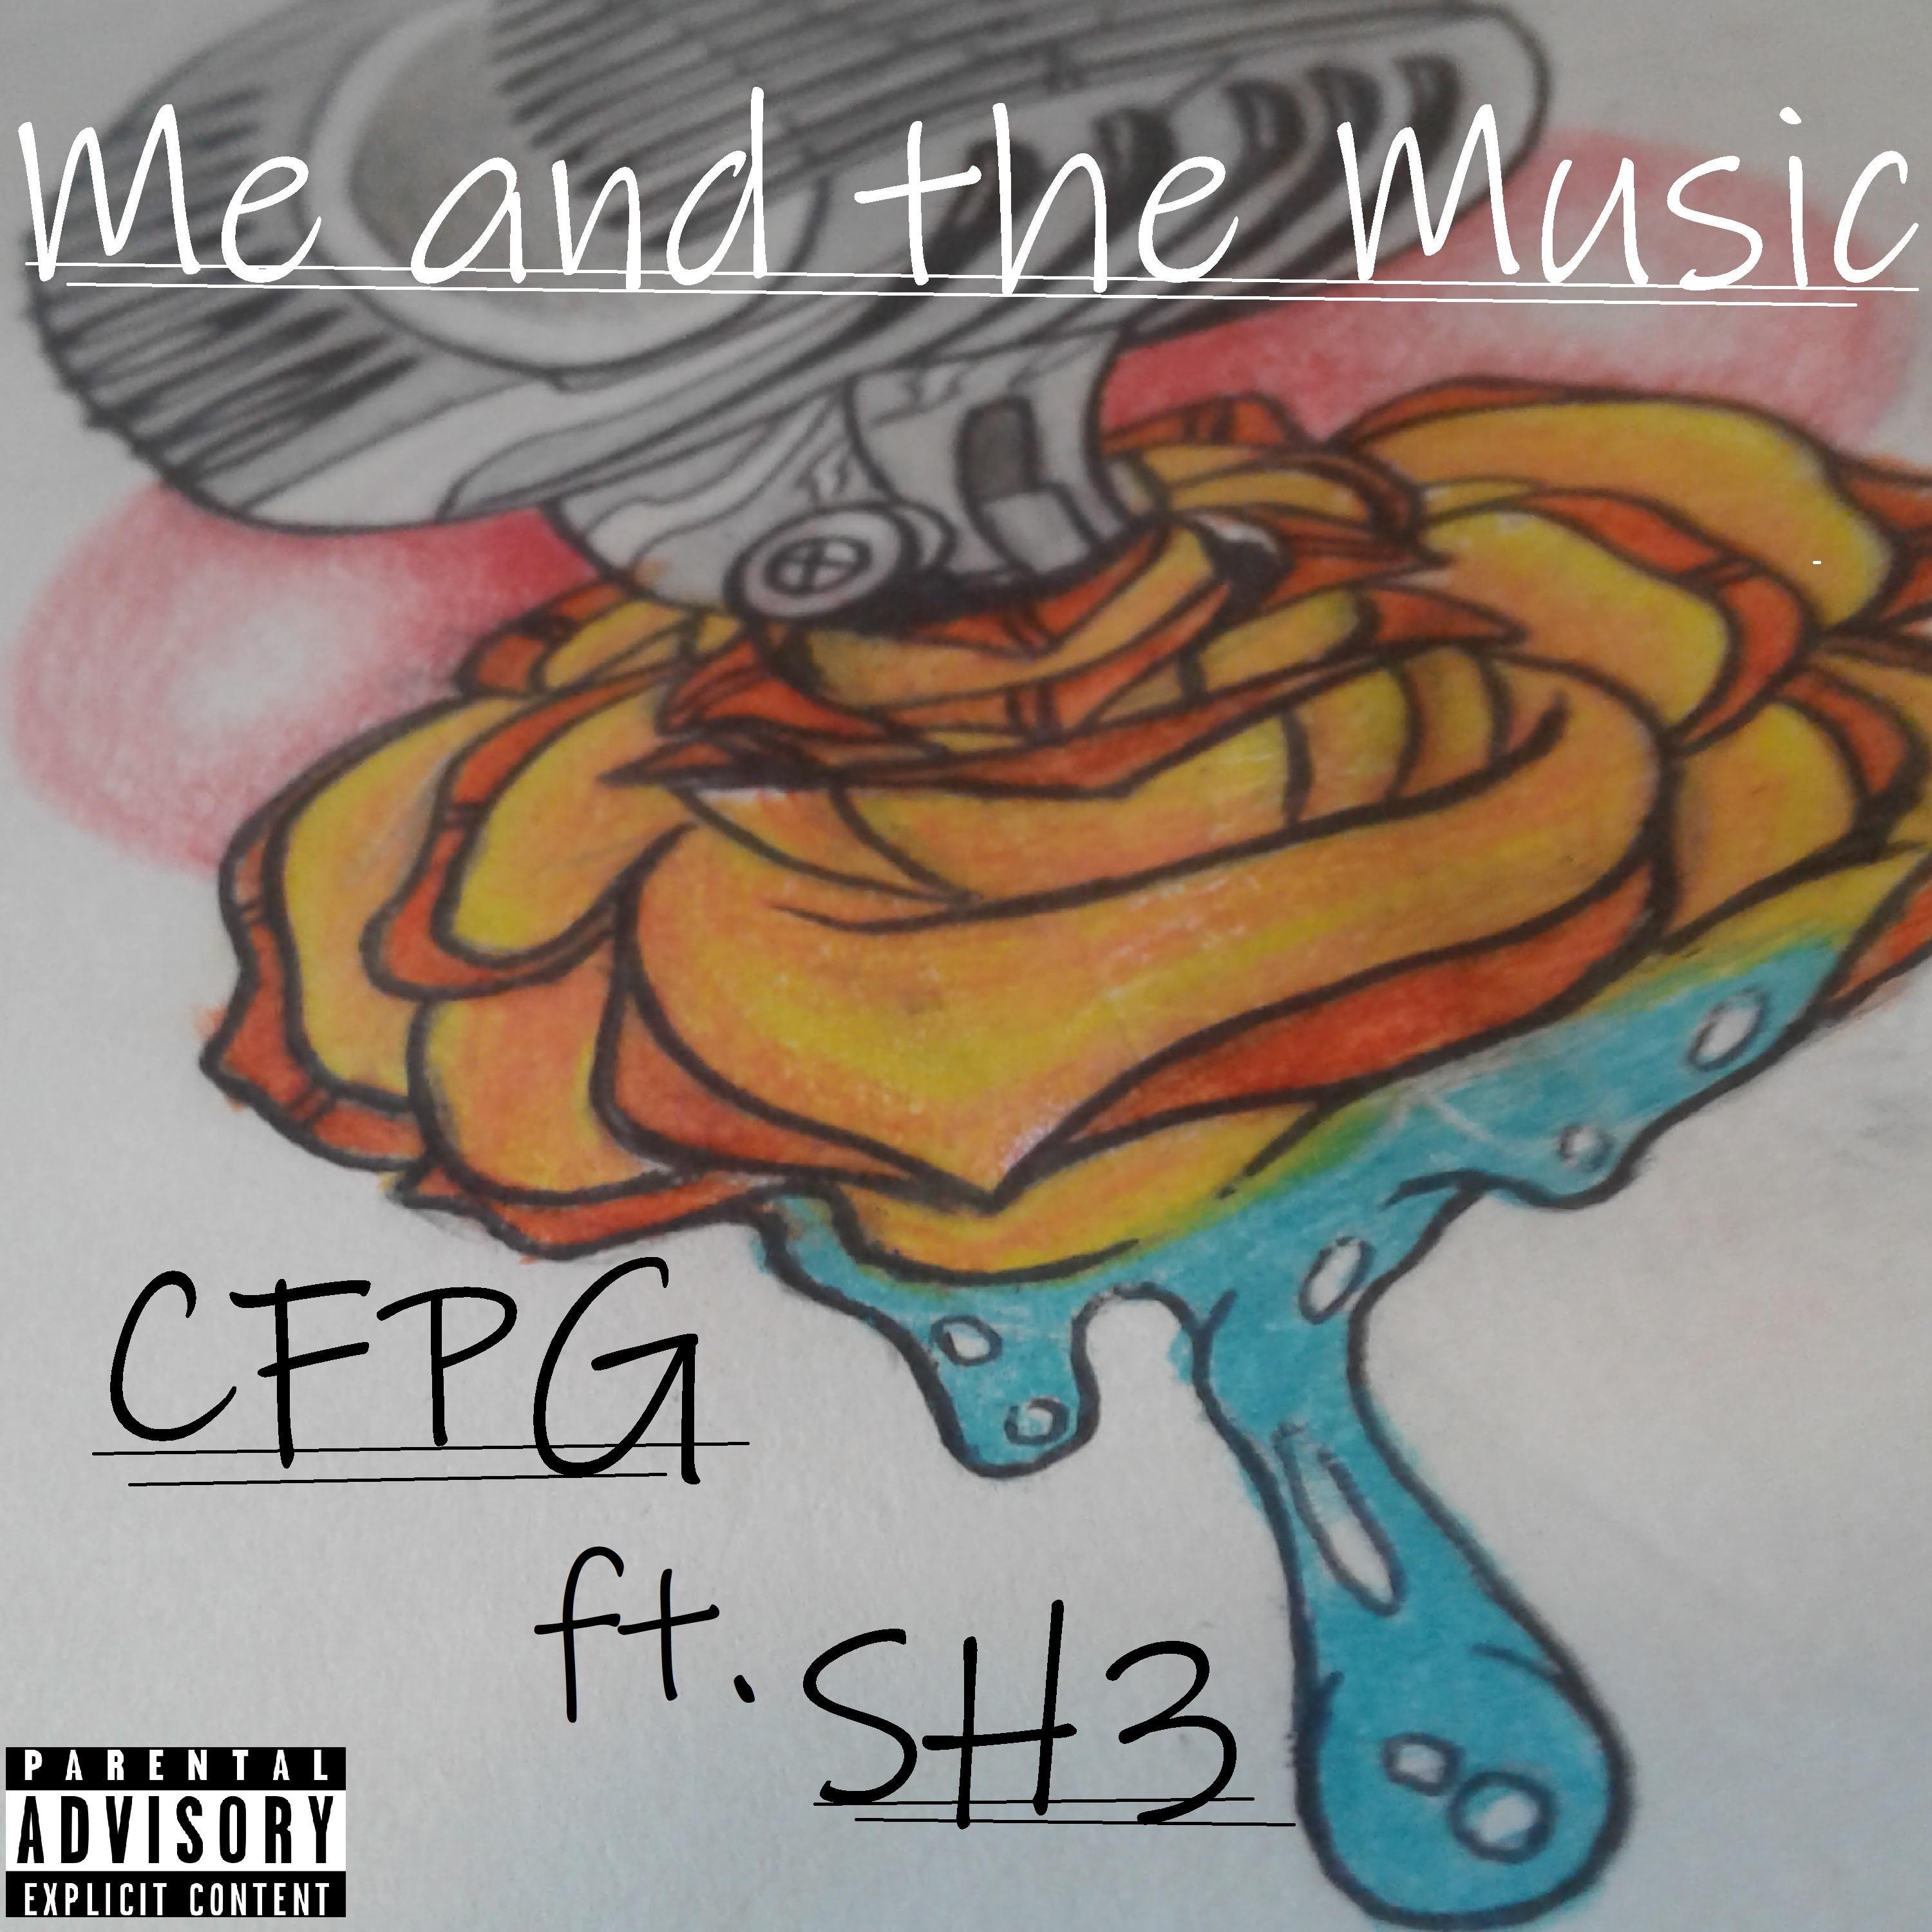 CFPG - Me and the Music (feat. Sh3)